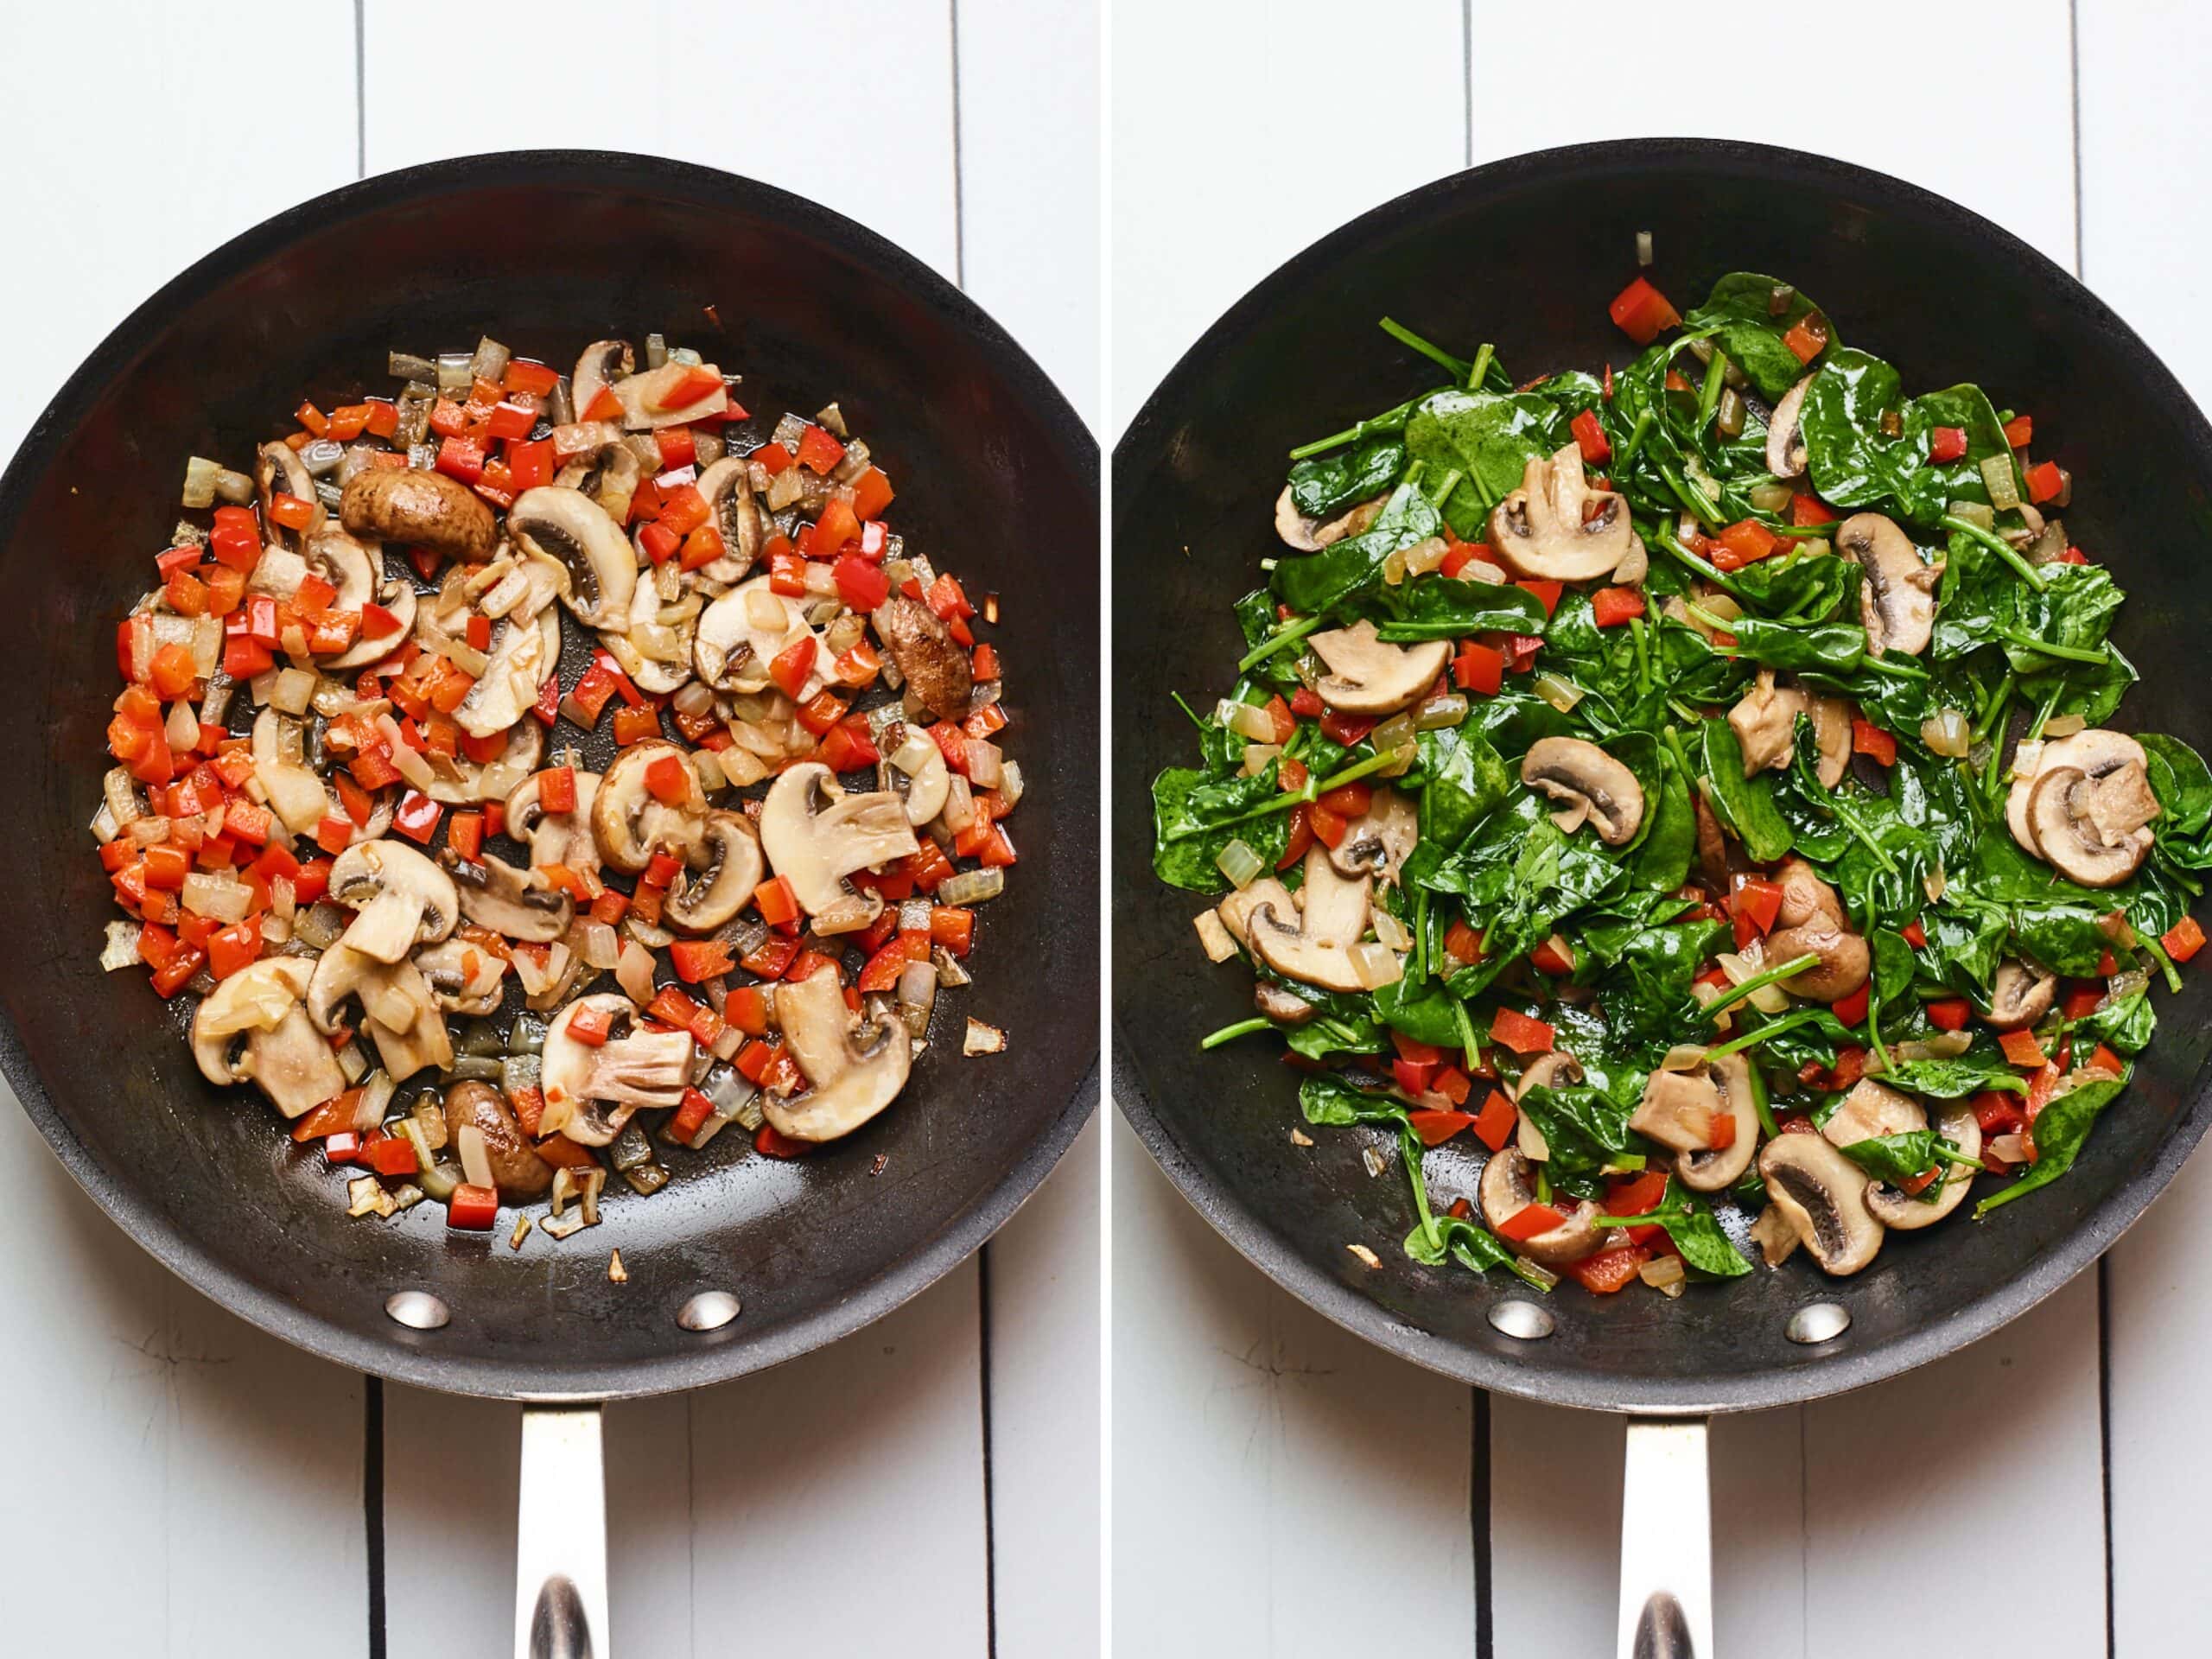 Side by side photos of a skillet with peppers, mushrooms and onion, and then the second skillet has spinach added.